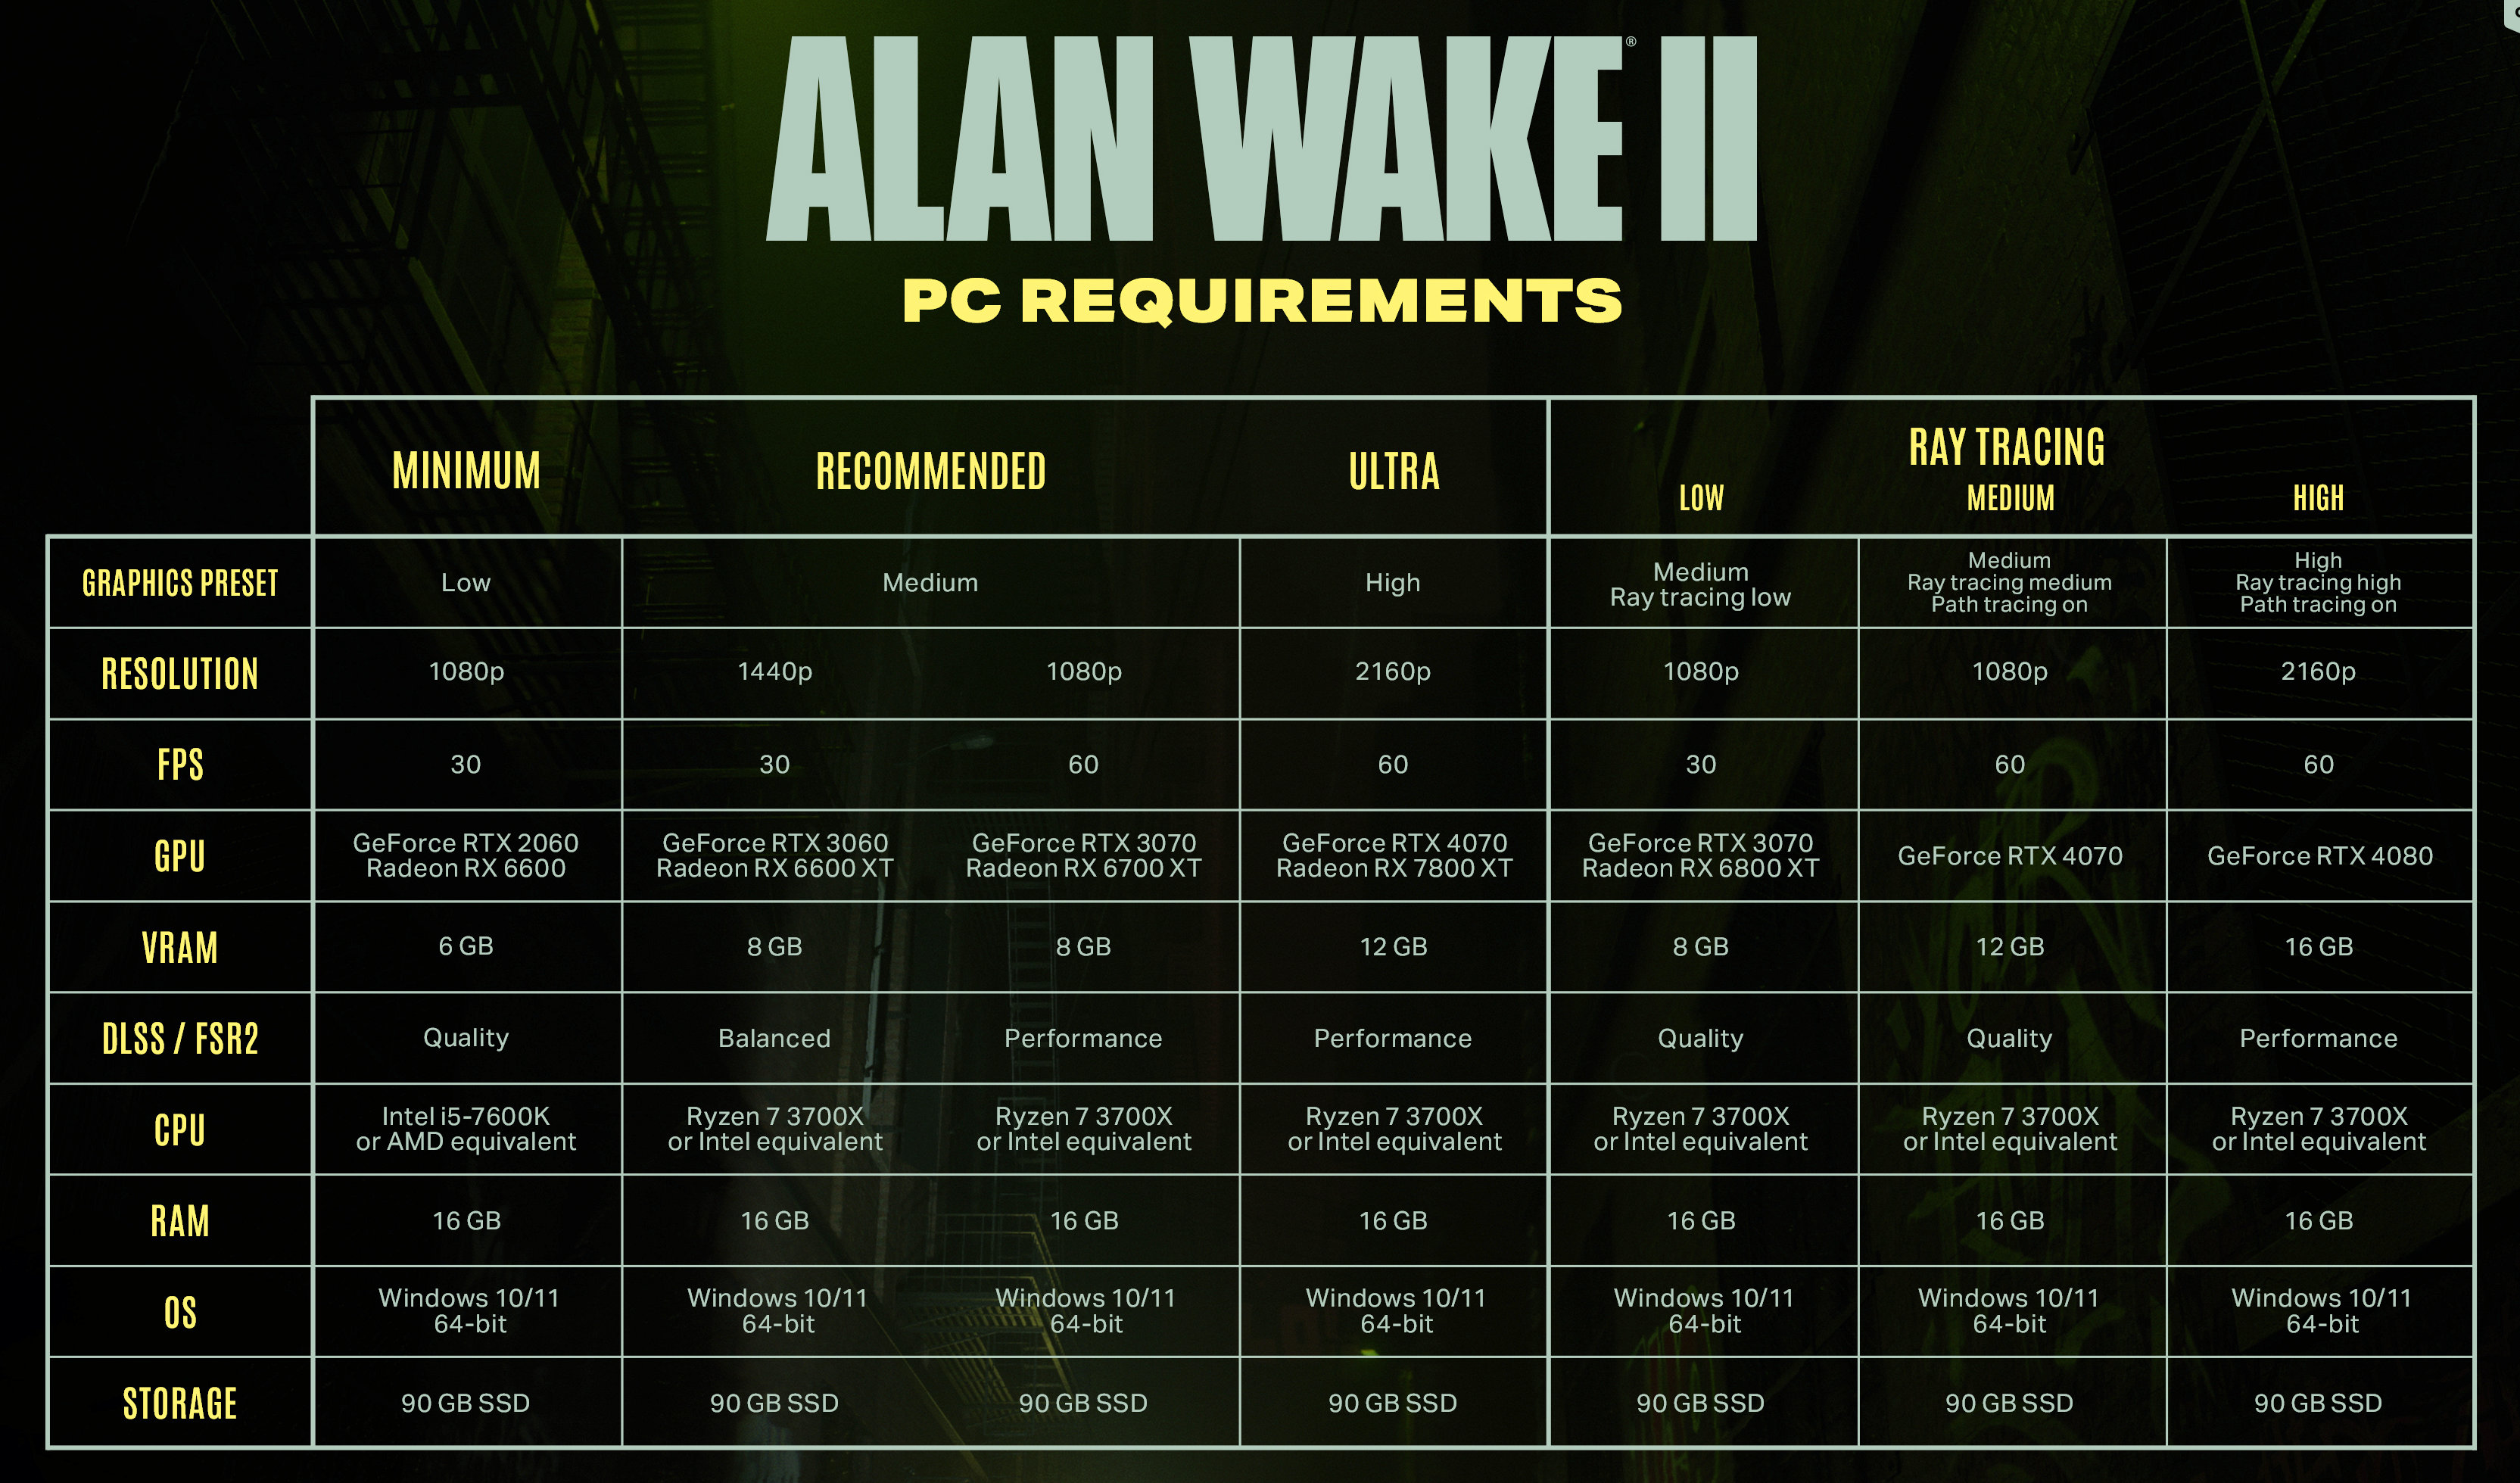 Can You Play Alan Wake 2 on GeForce Now? 